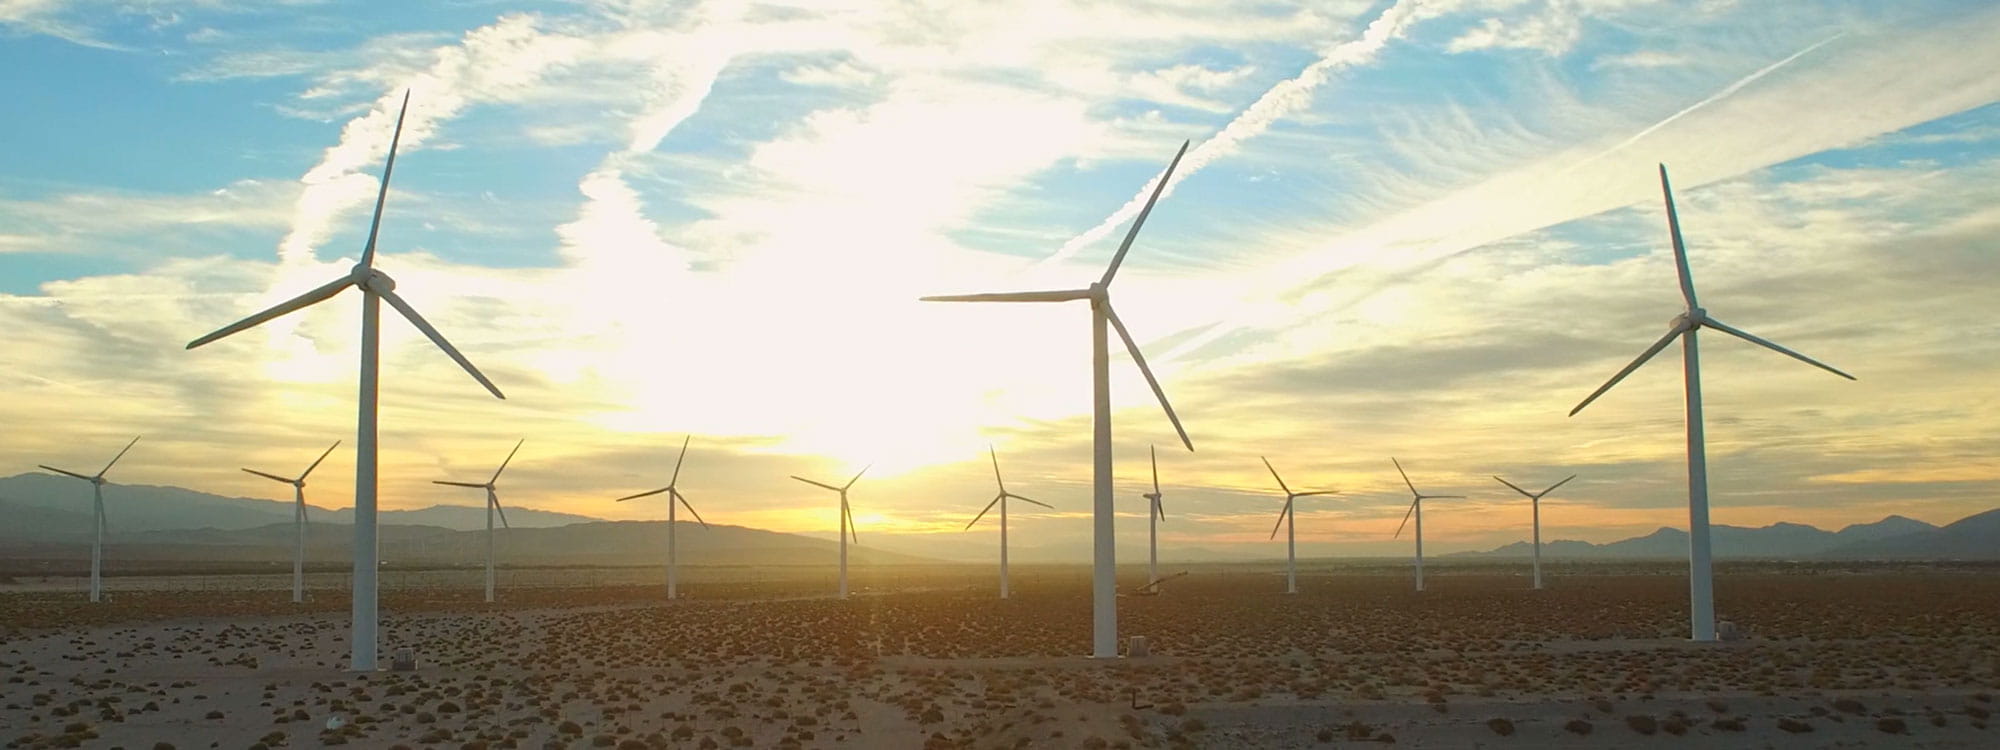 Wind turbines on the field with sunset